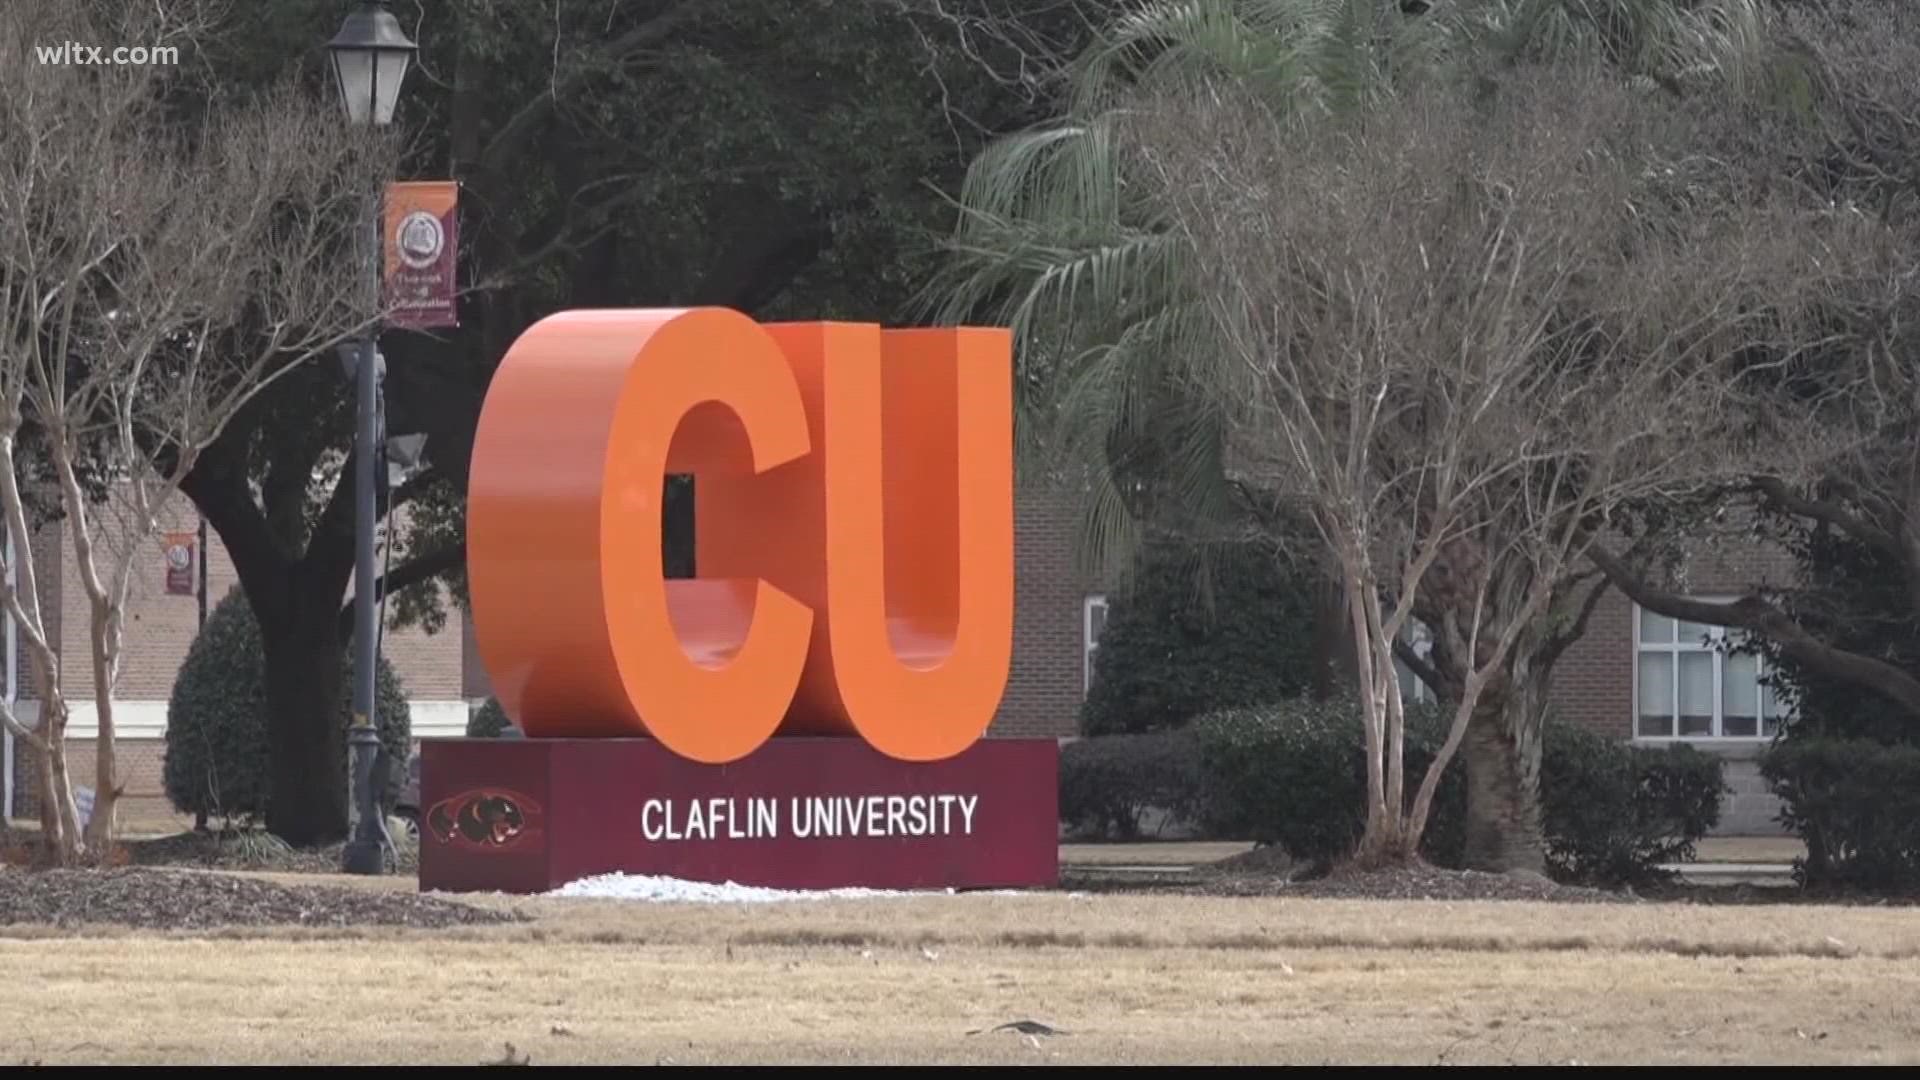 Claflin University has received $17.4M, the money comes from Congressman Clyburn's office.